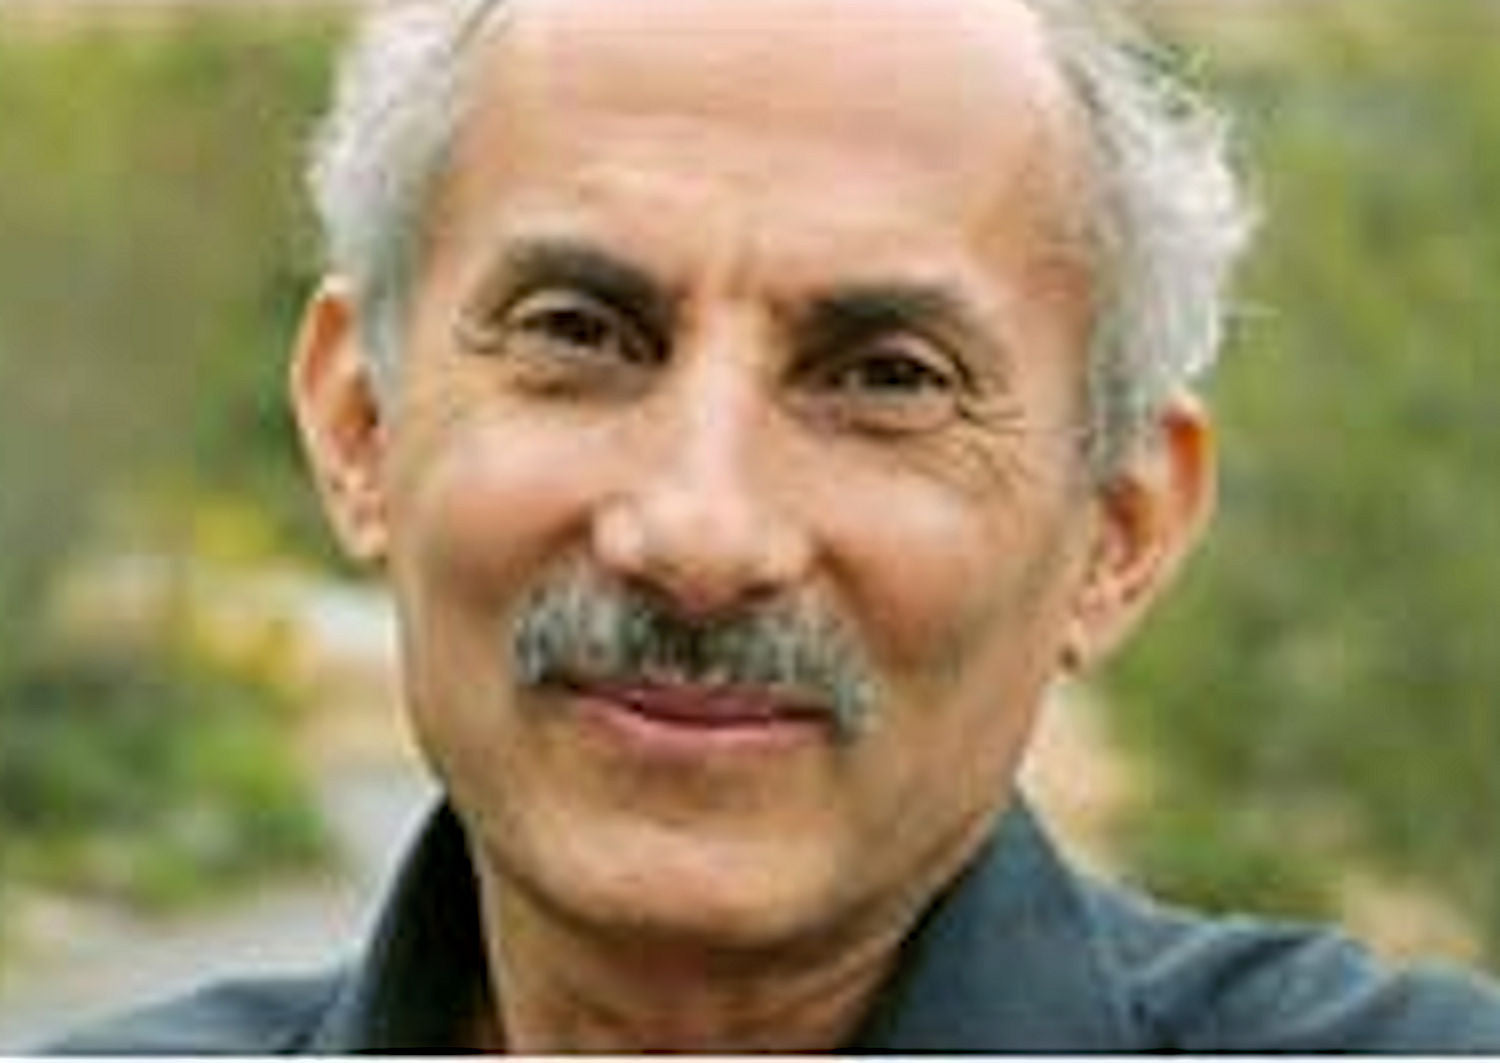 The Art of Foregiveness, Lovingkindness, and Peace by Jack Kornfield